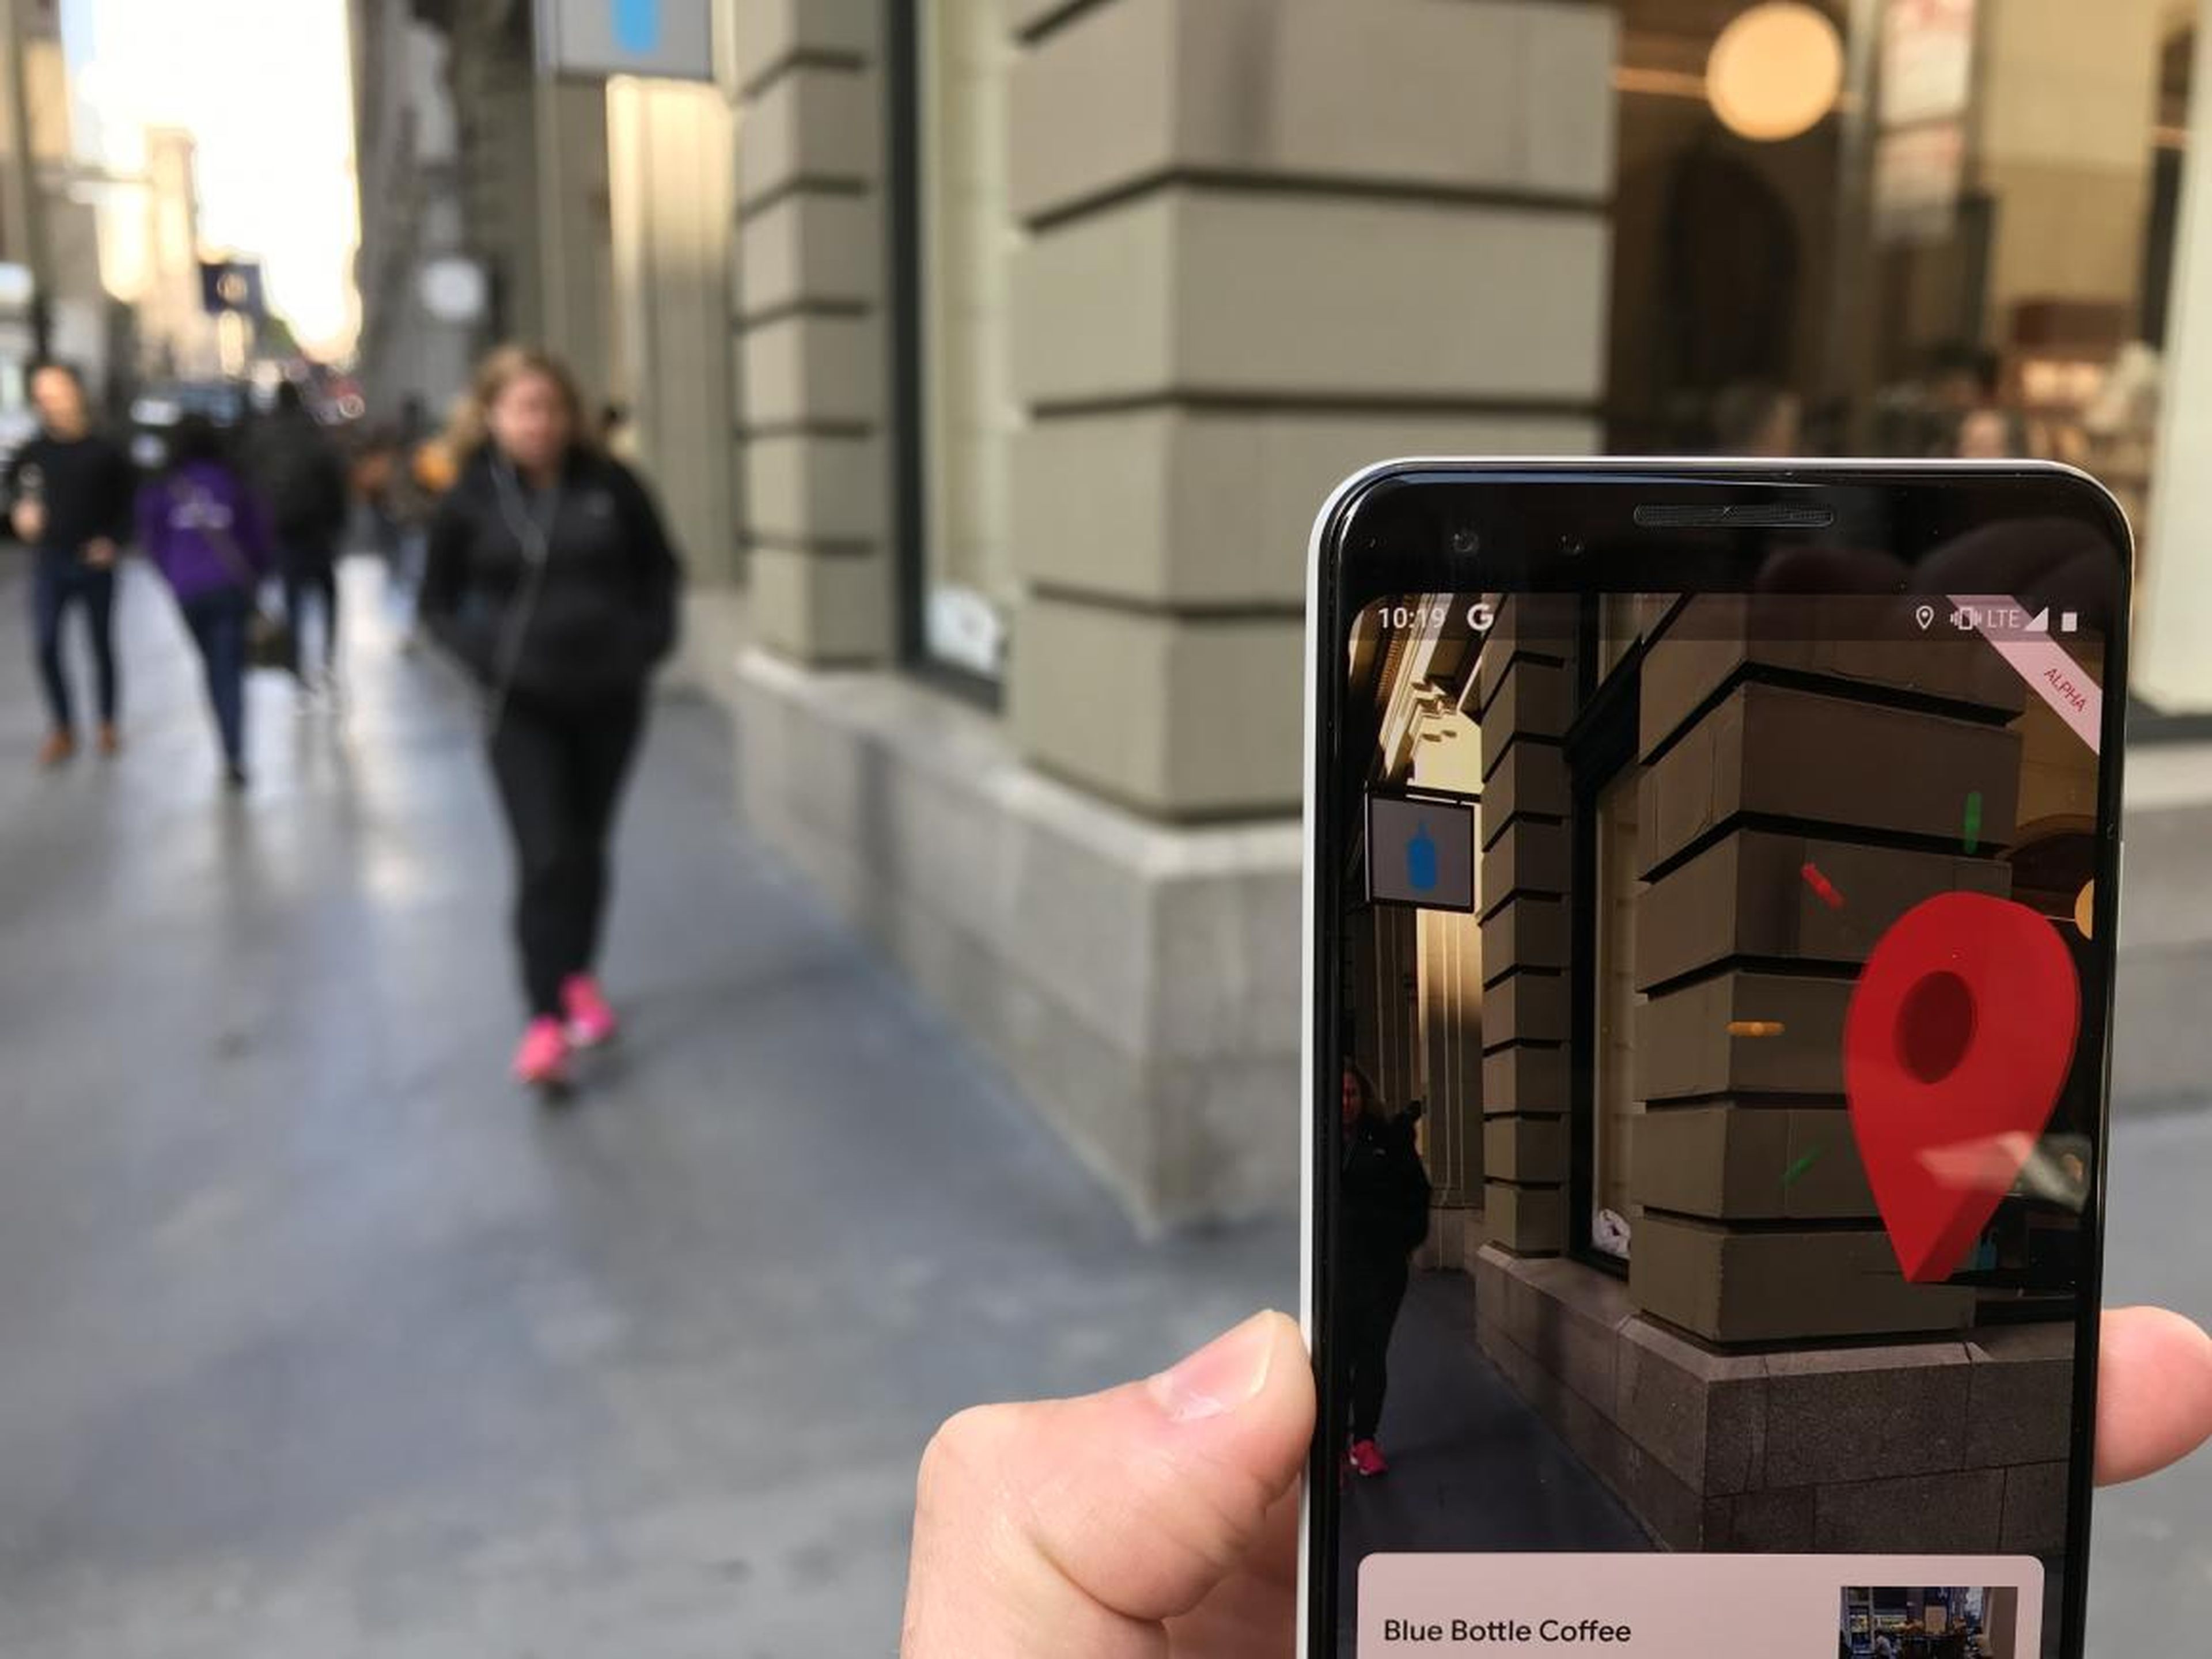 Once you arrive at your destination, a pin-drop will appear with a fun animation to accompany it. Since we were heading to grab a coffee, Google Maps also pulled up information about Blue Bottle in case we wanted to check out